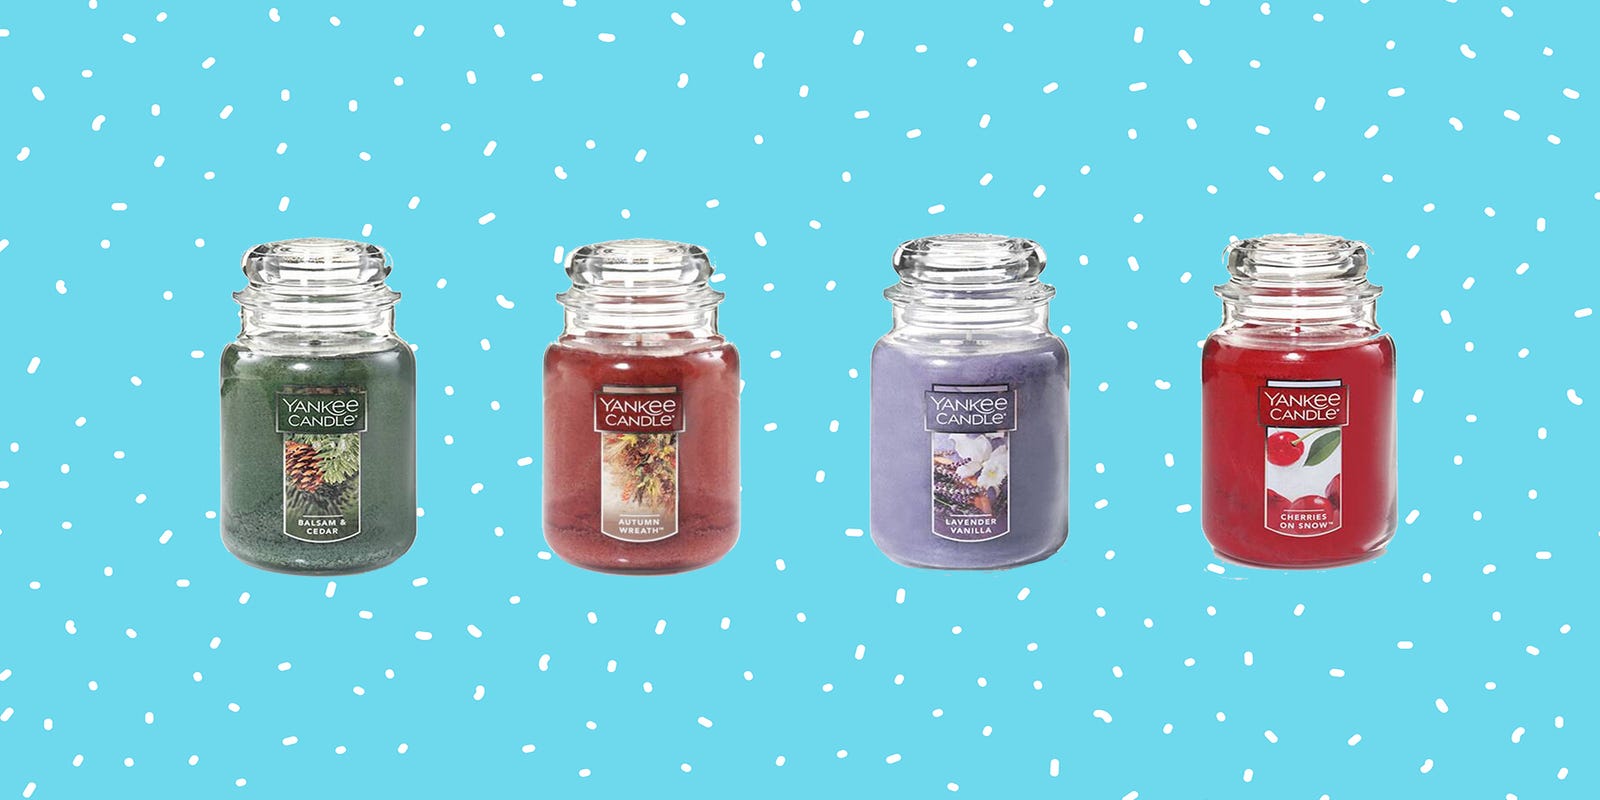 Yankee Candle sale This semiannual sale can help you save big